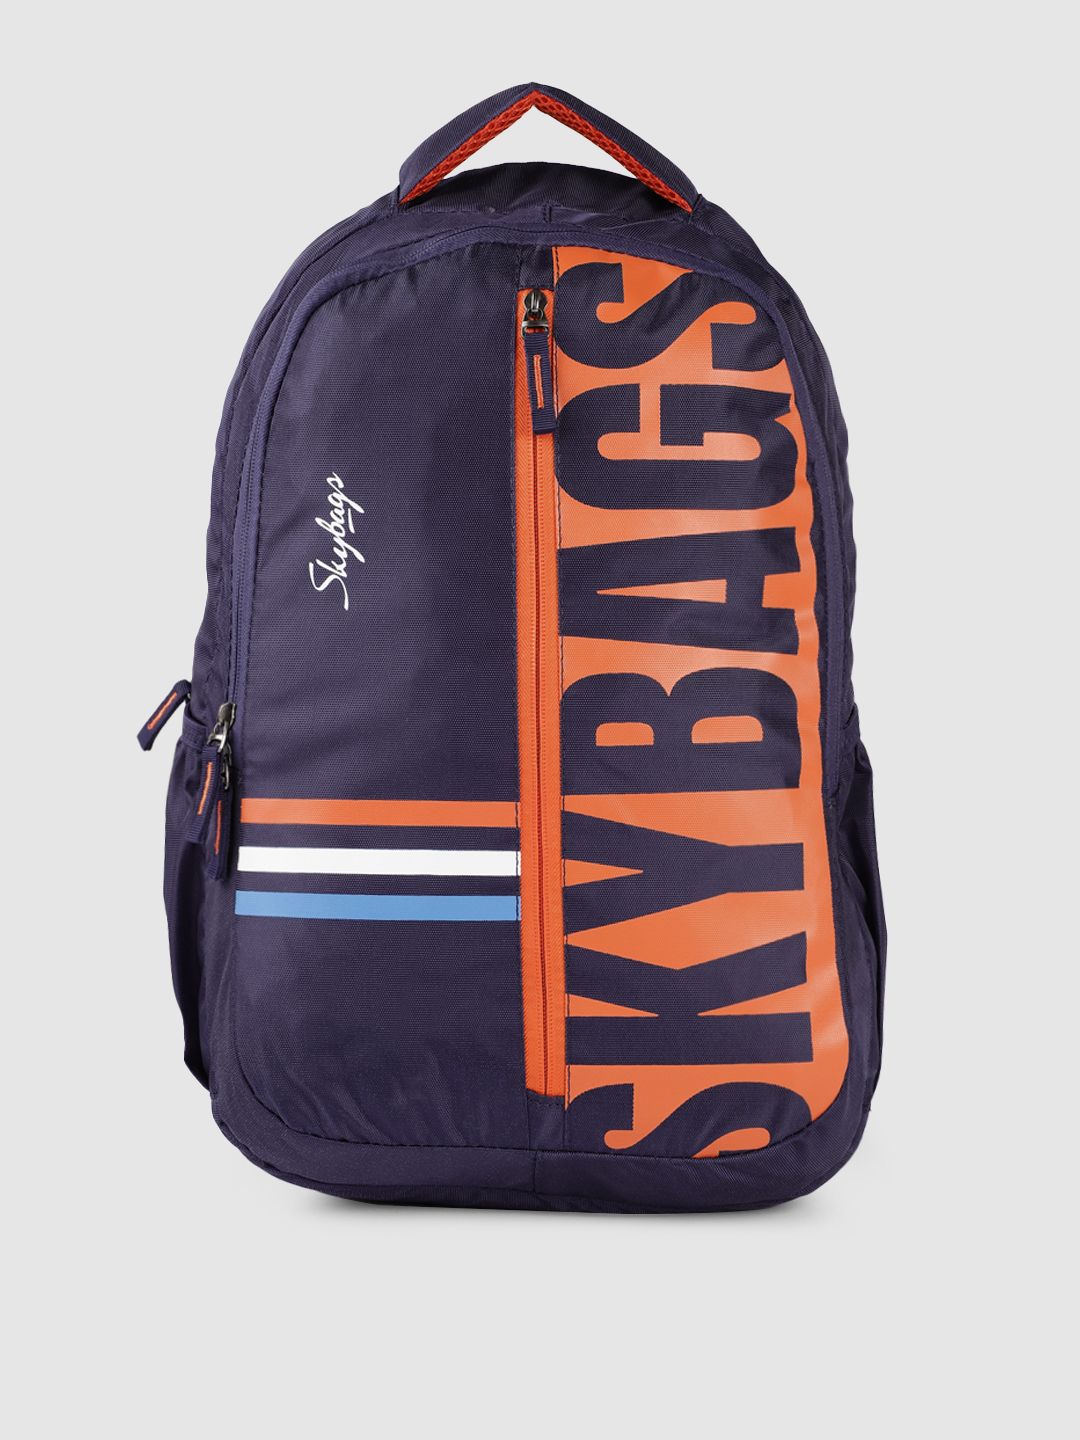 Skybags Unisex Navy Blue Printed Backpack Price in India